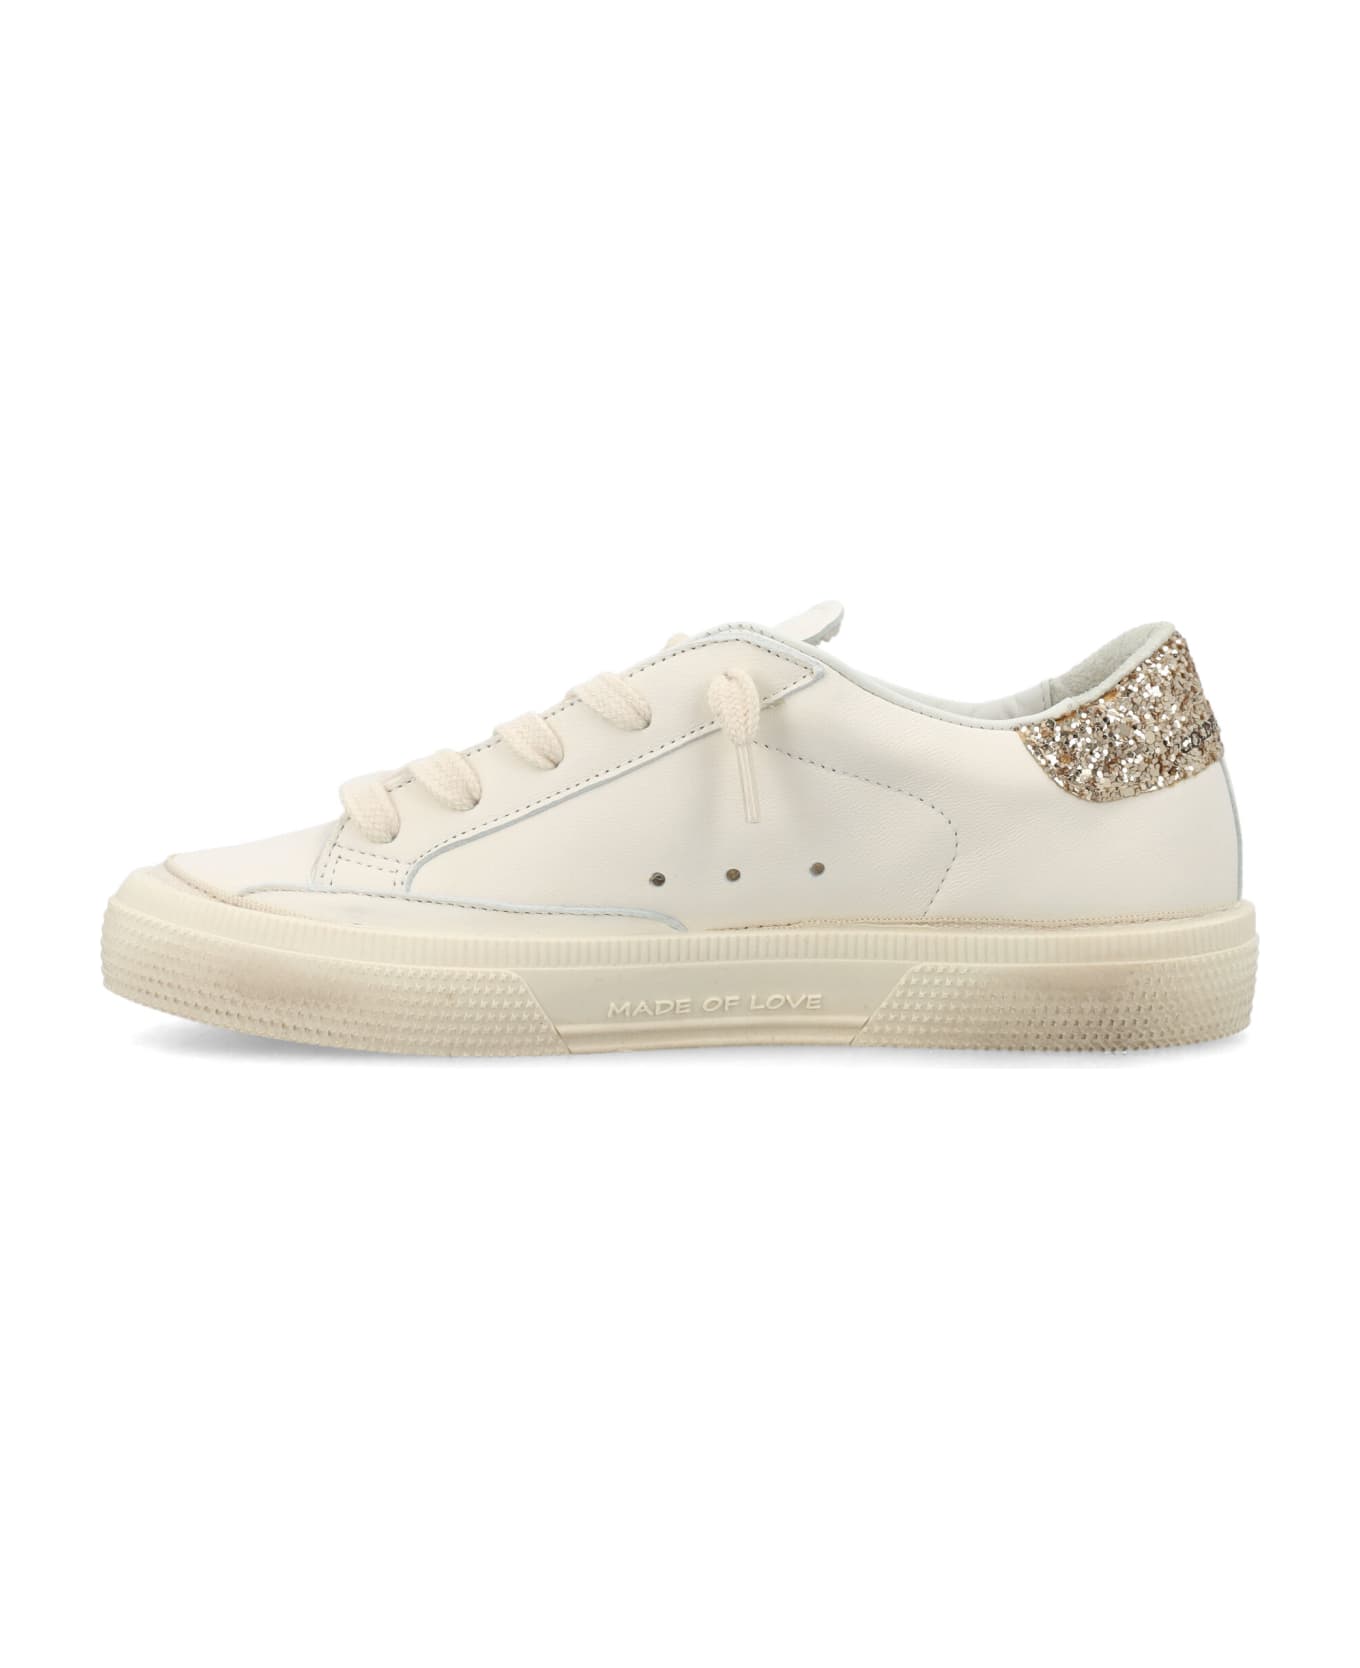 Golden Goose May Sneakers - WHITE/GOLD